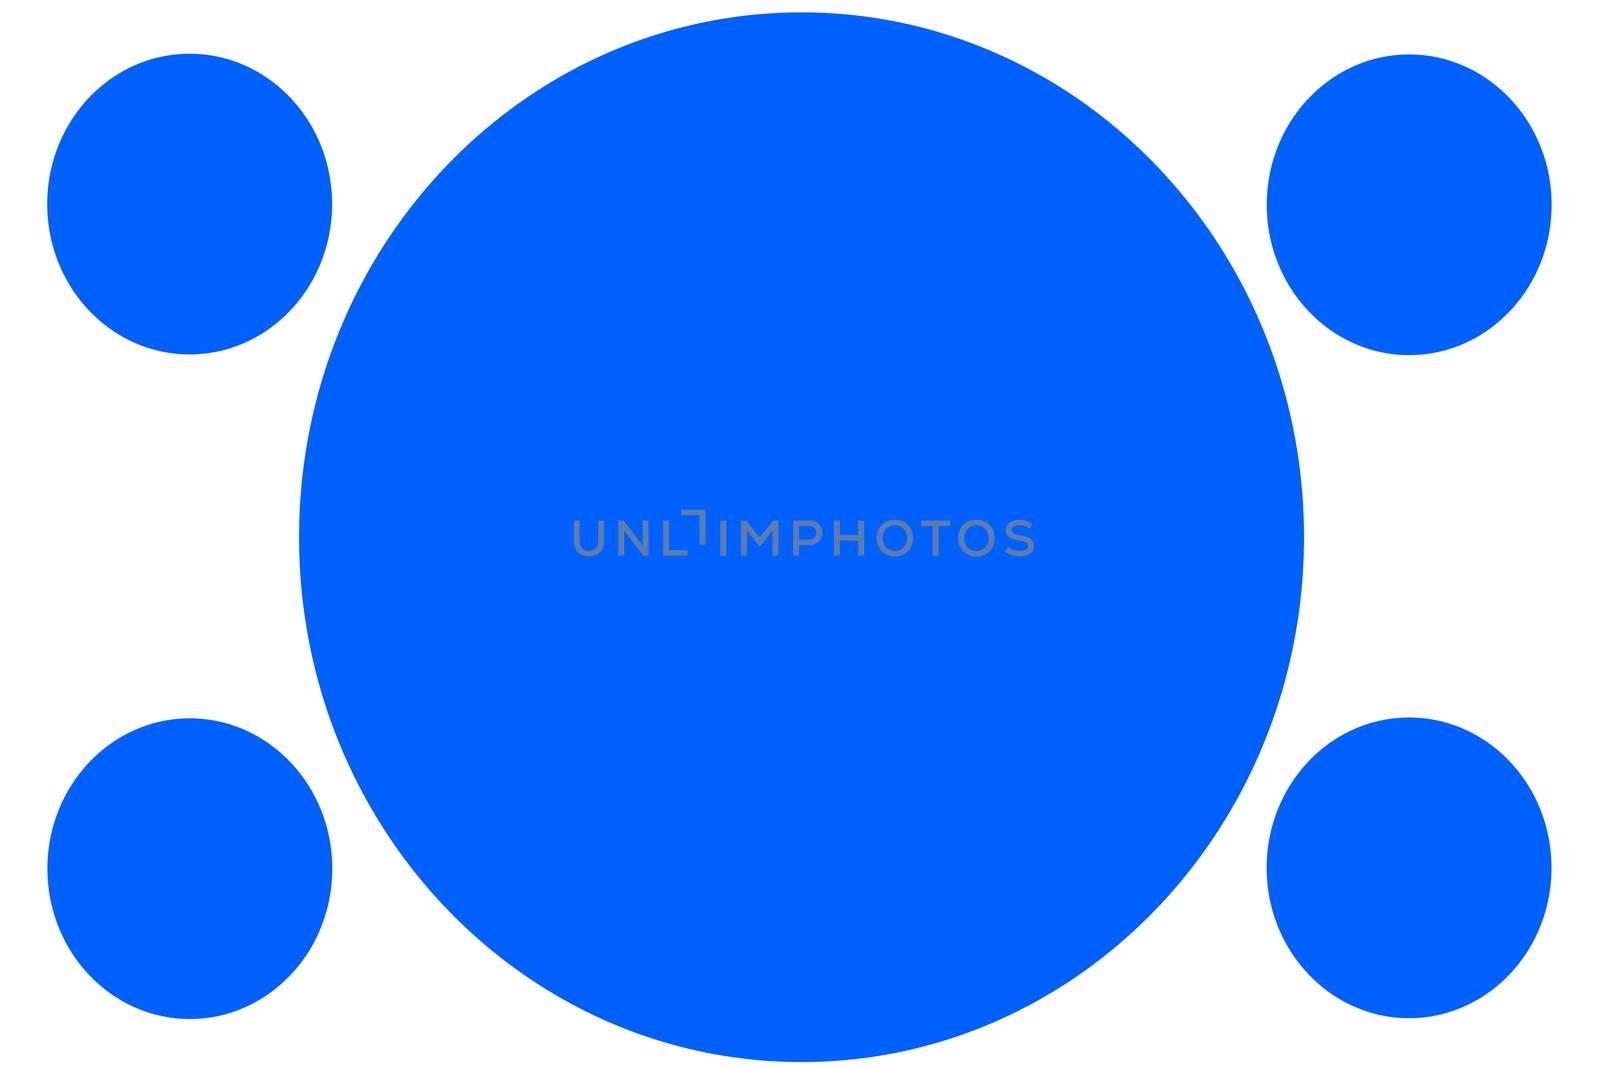 Circular Colored Banners - Blue Circles. Can be used for Illustration purpose, background, website, businesses, presentations, Product Promotions etc. Empty Circles for Text, Data Placement.